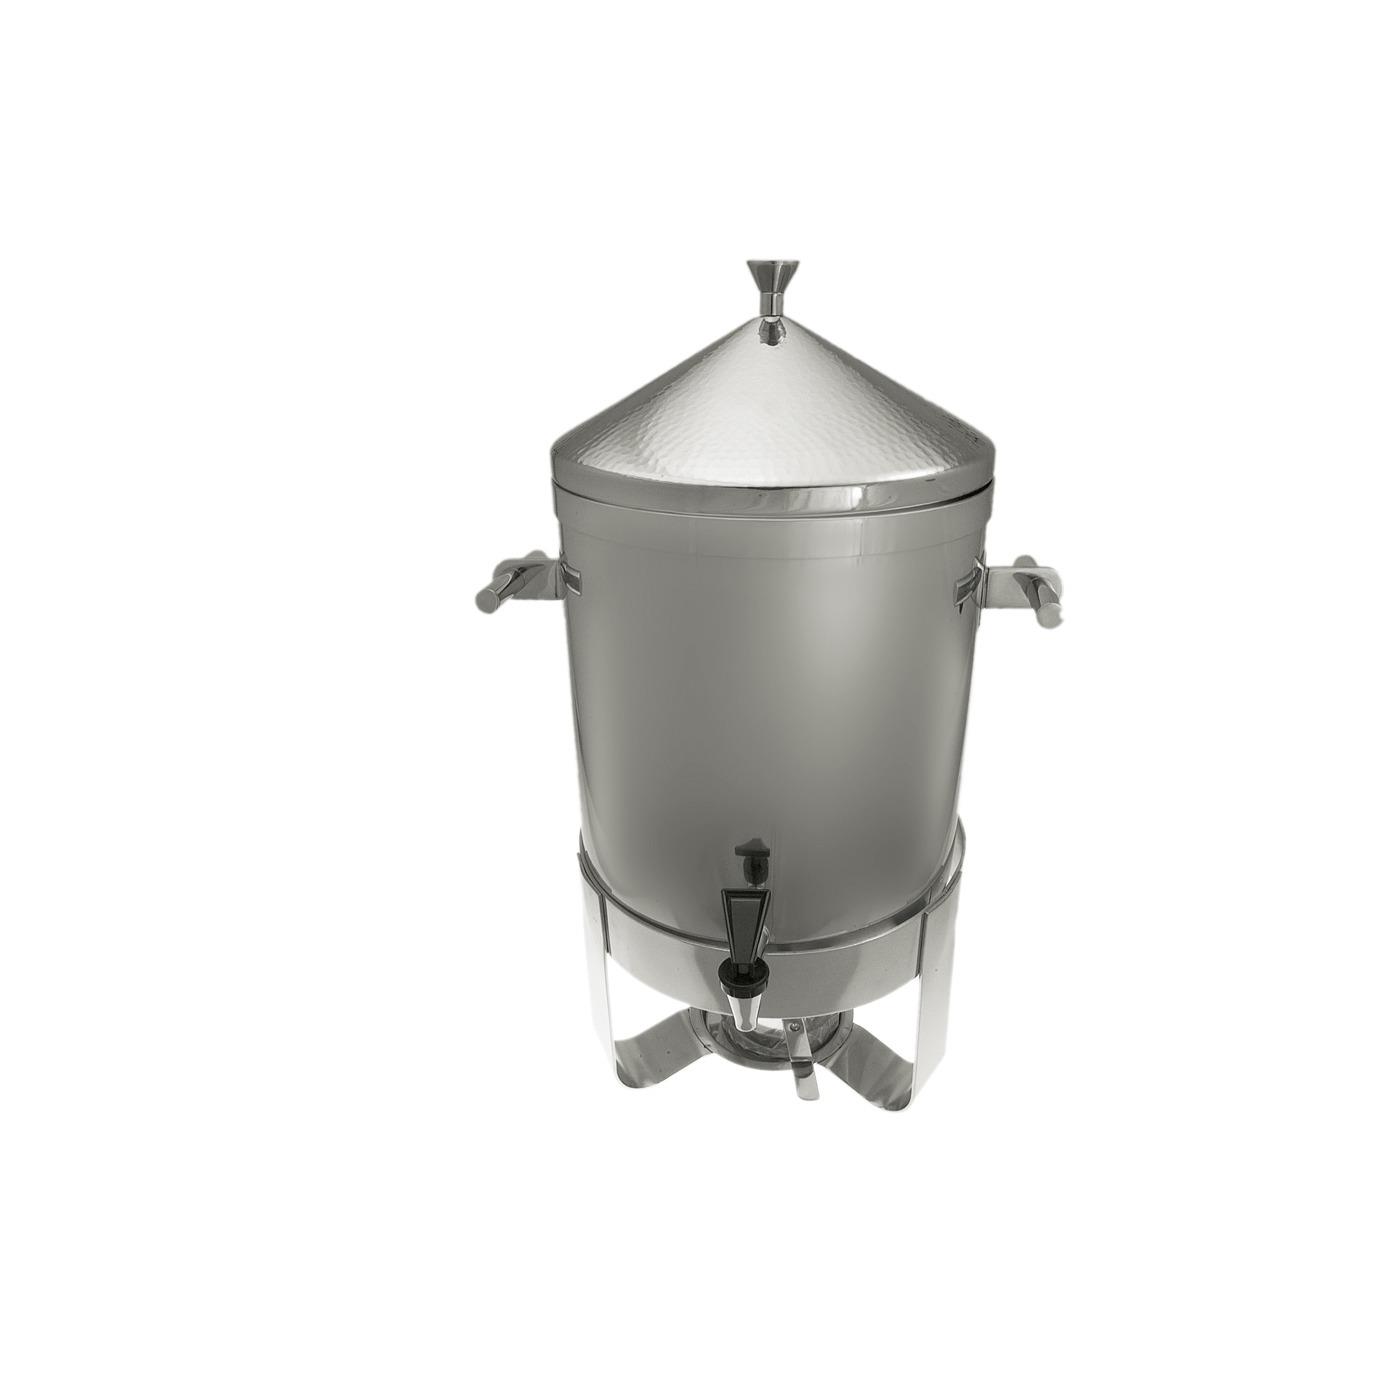 Event! Hammered 50 Cup Coffee Urn, Stainless Steel